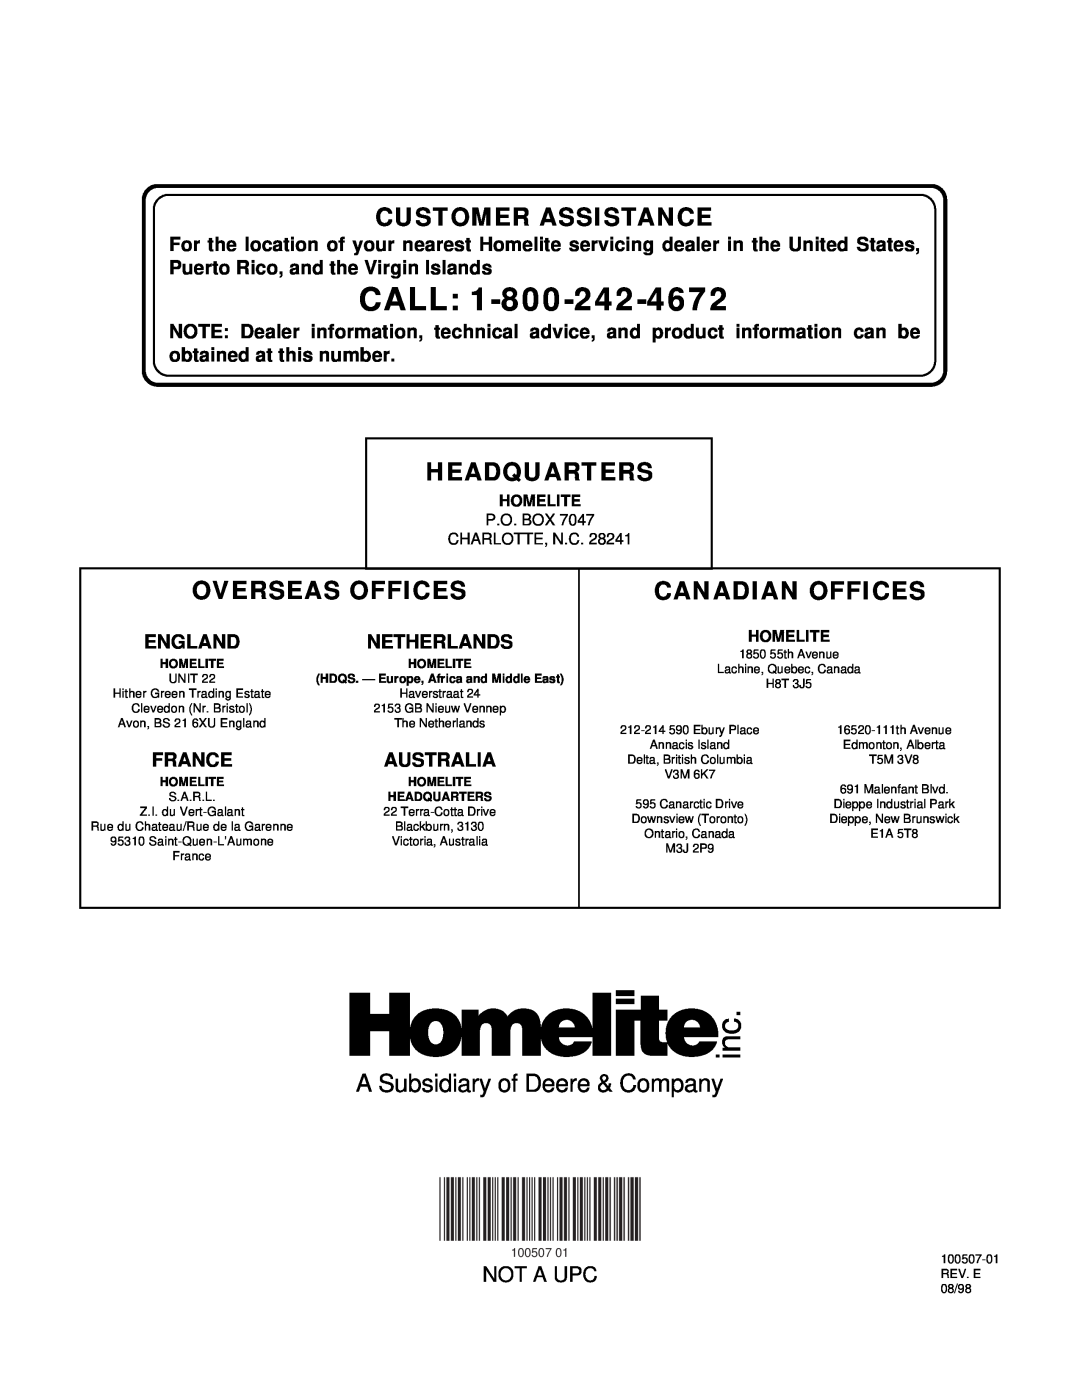 Homelite HH55 Not A Upc, France, Australia, Call, Customer Assistance, Headquarters, Overseas Offices, Canadian Offices 